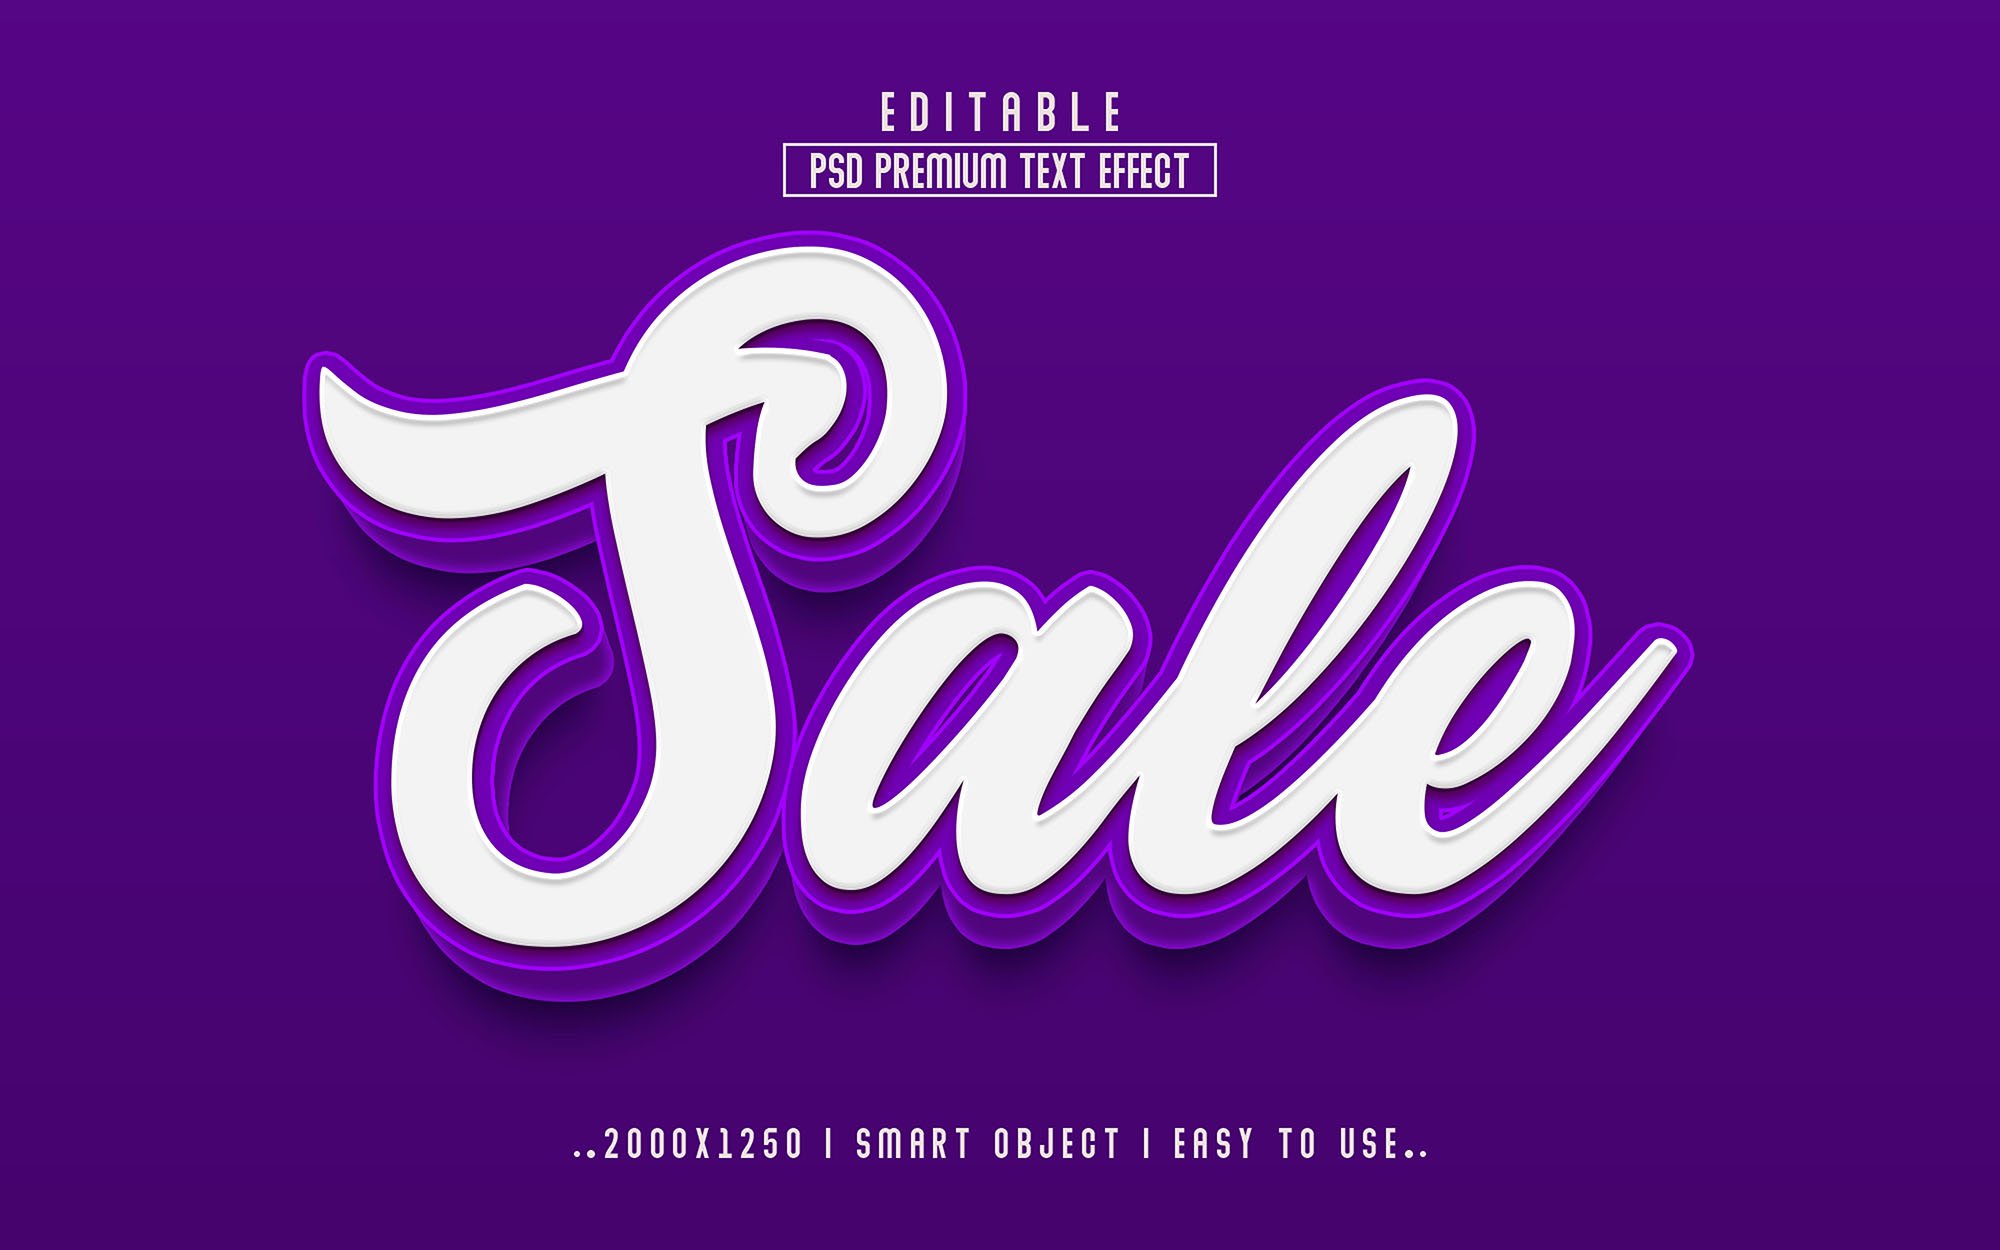 Sale 3D Editable Text Effect Stylecover image.